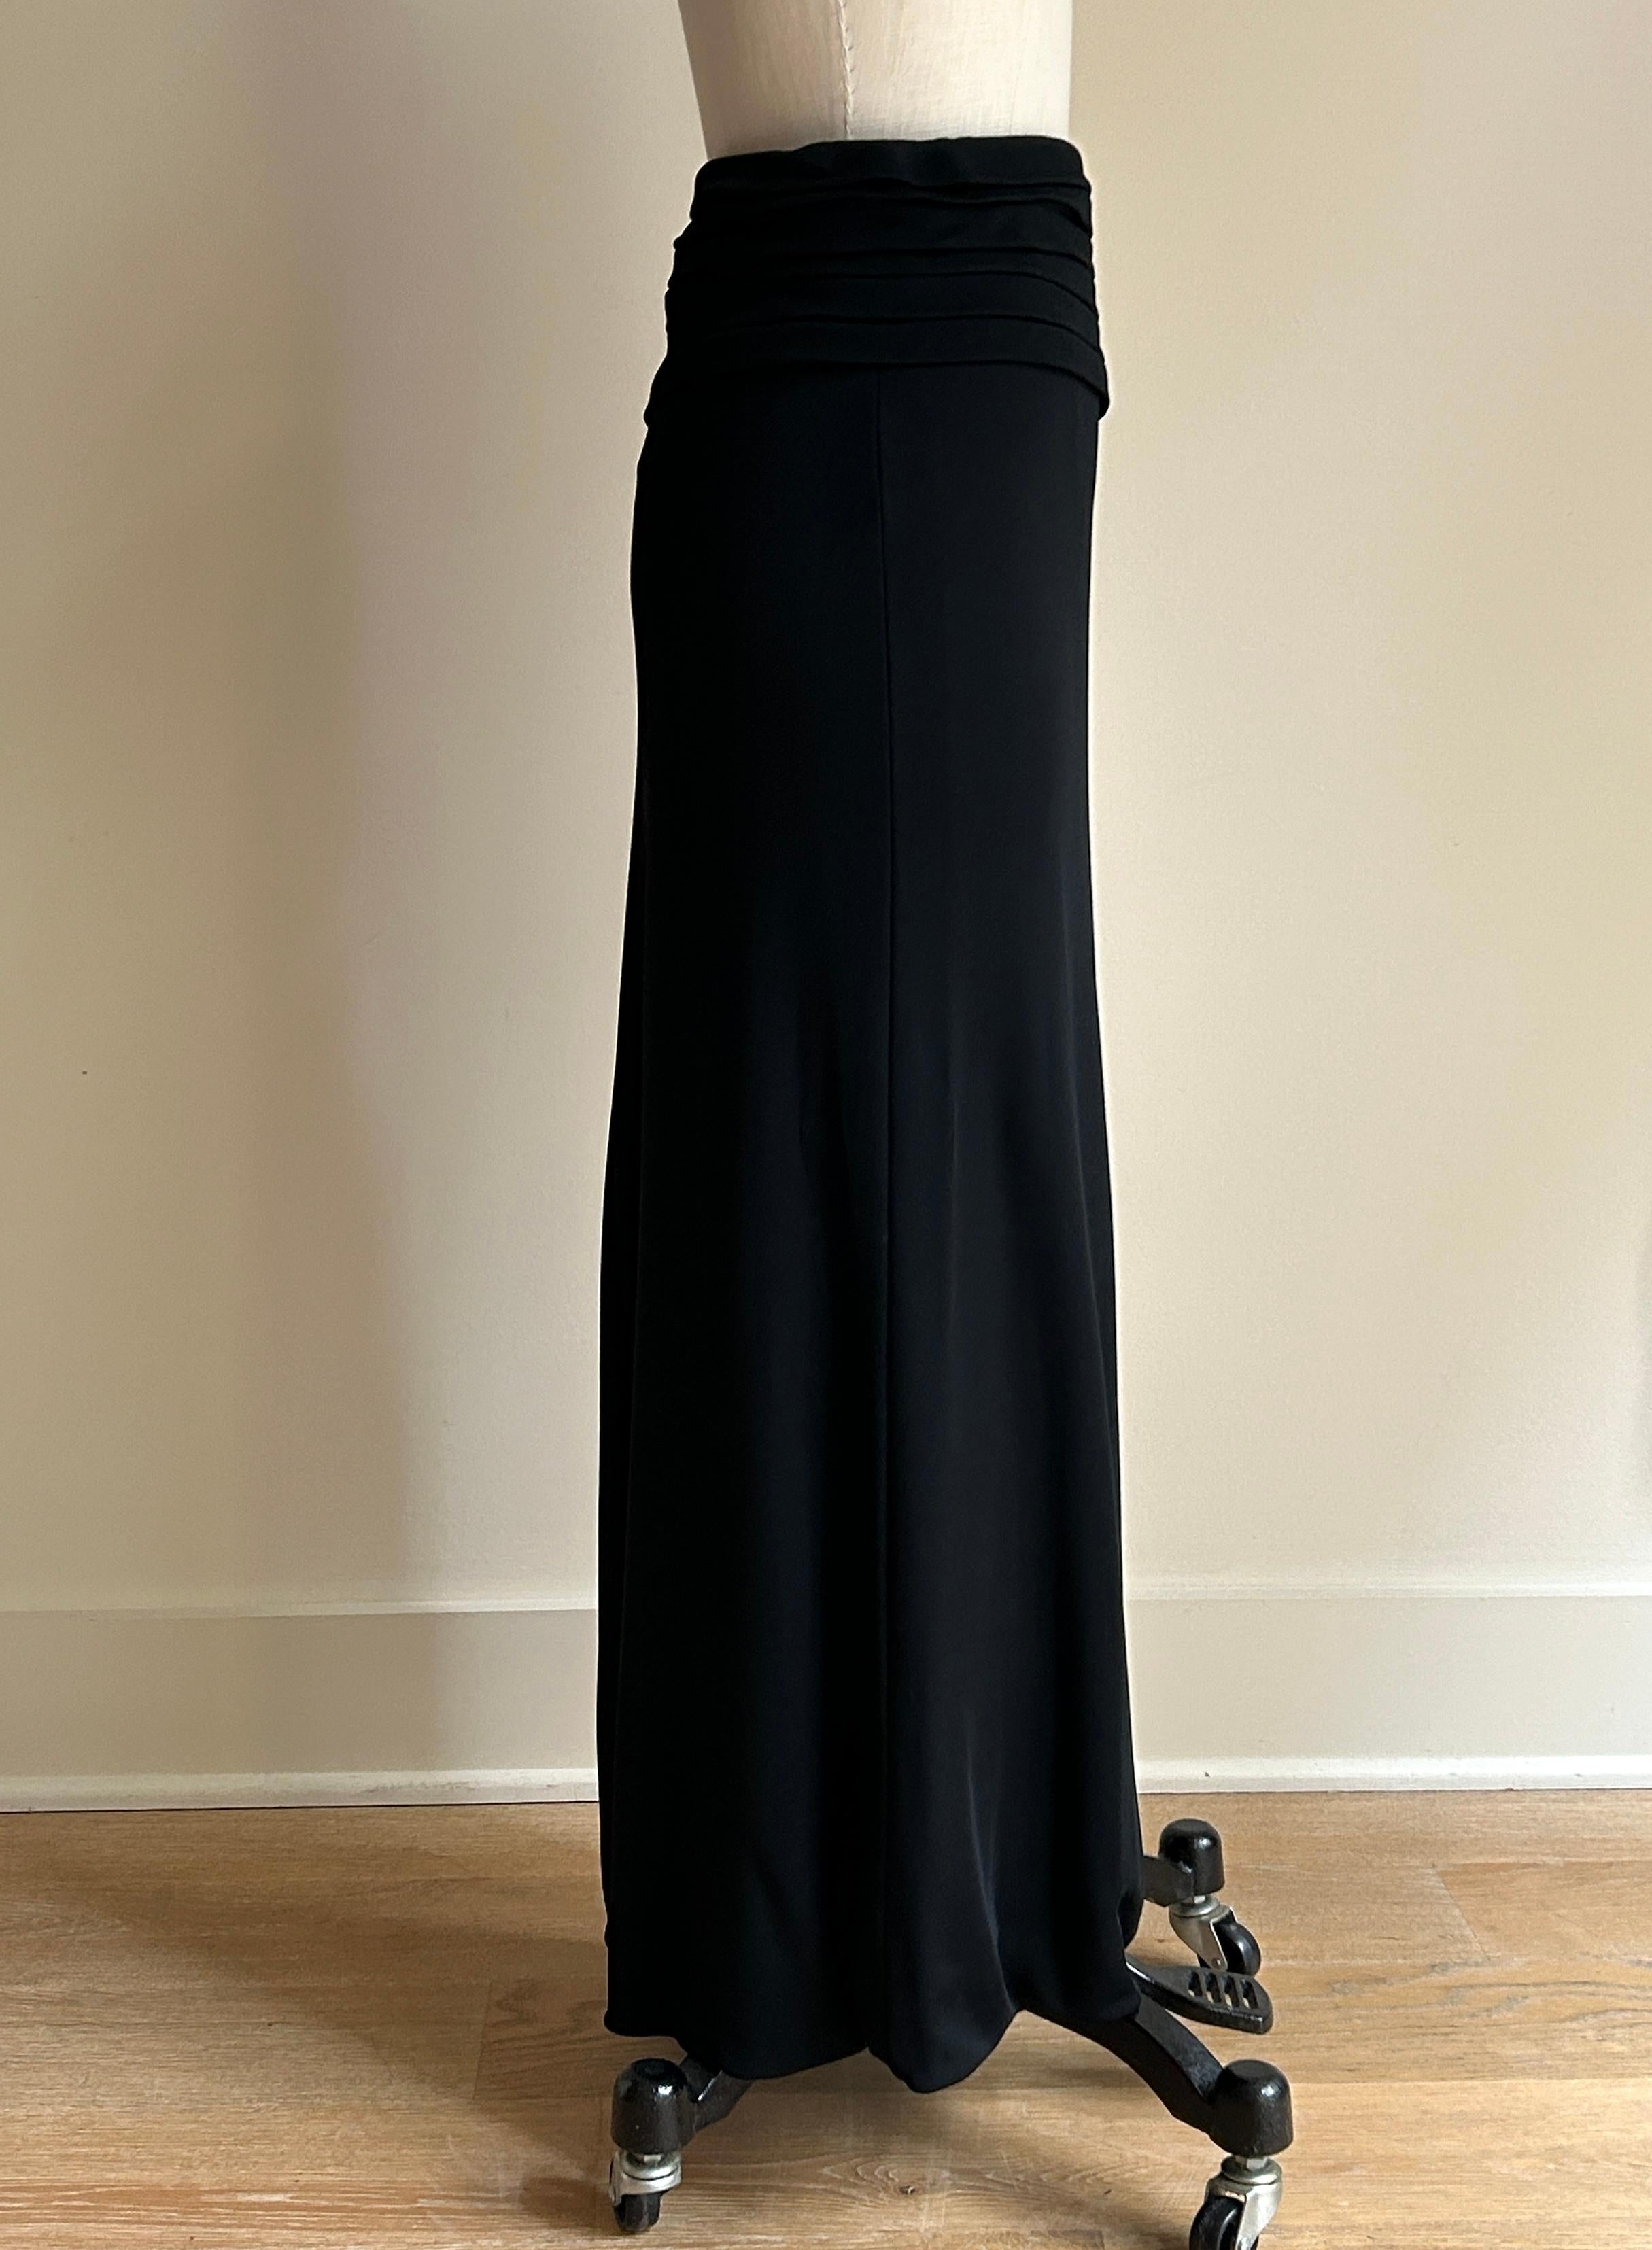 Giorgio Armani Unworn 1990s Black Midi Skirt with Pleat Detail at Waist In New Condition For Sale In San Francisco, CA